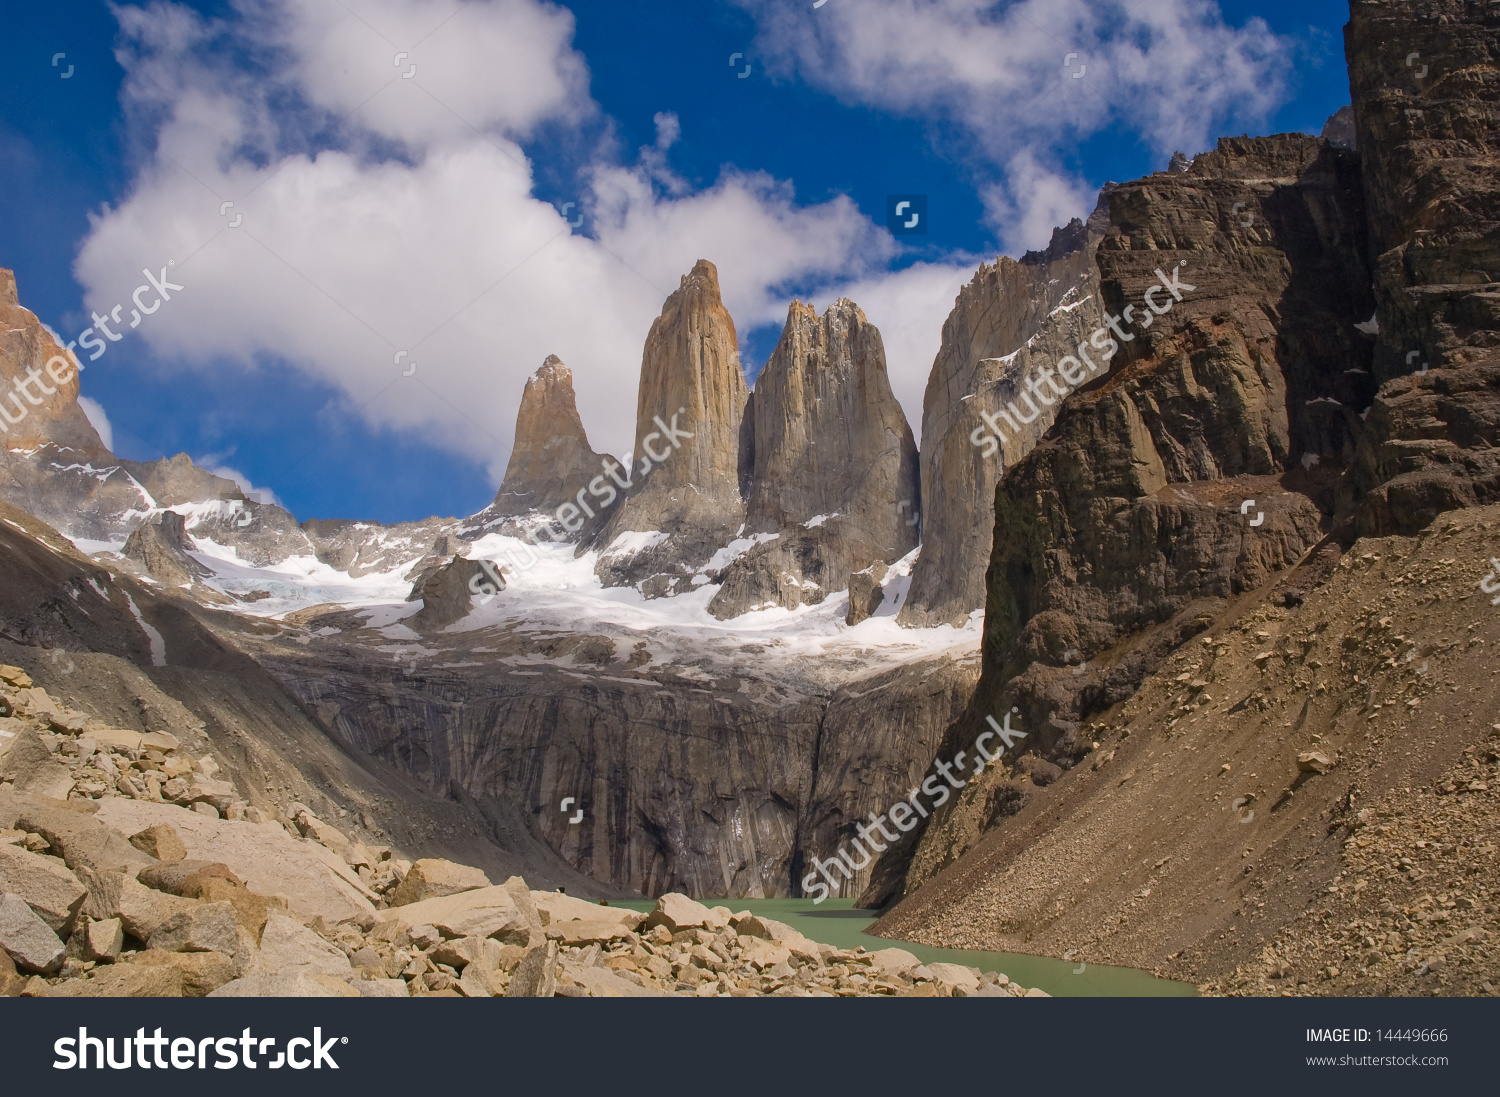 Torres Del Paine National Park clipart #7, Download drawings